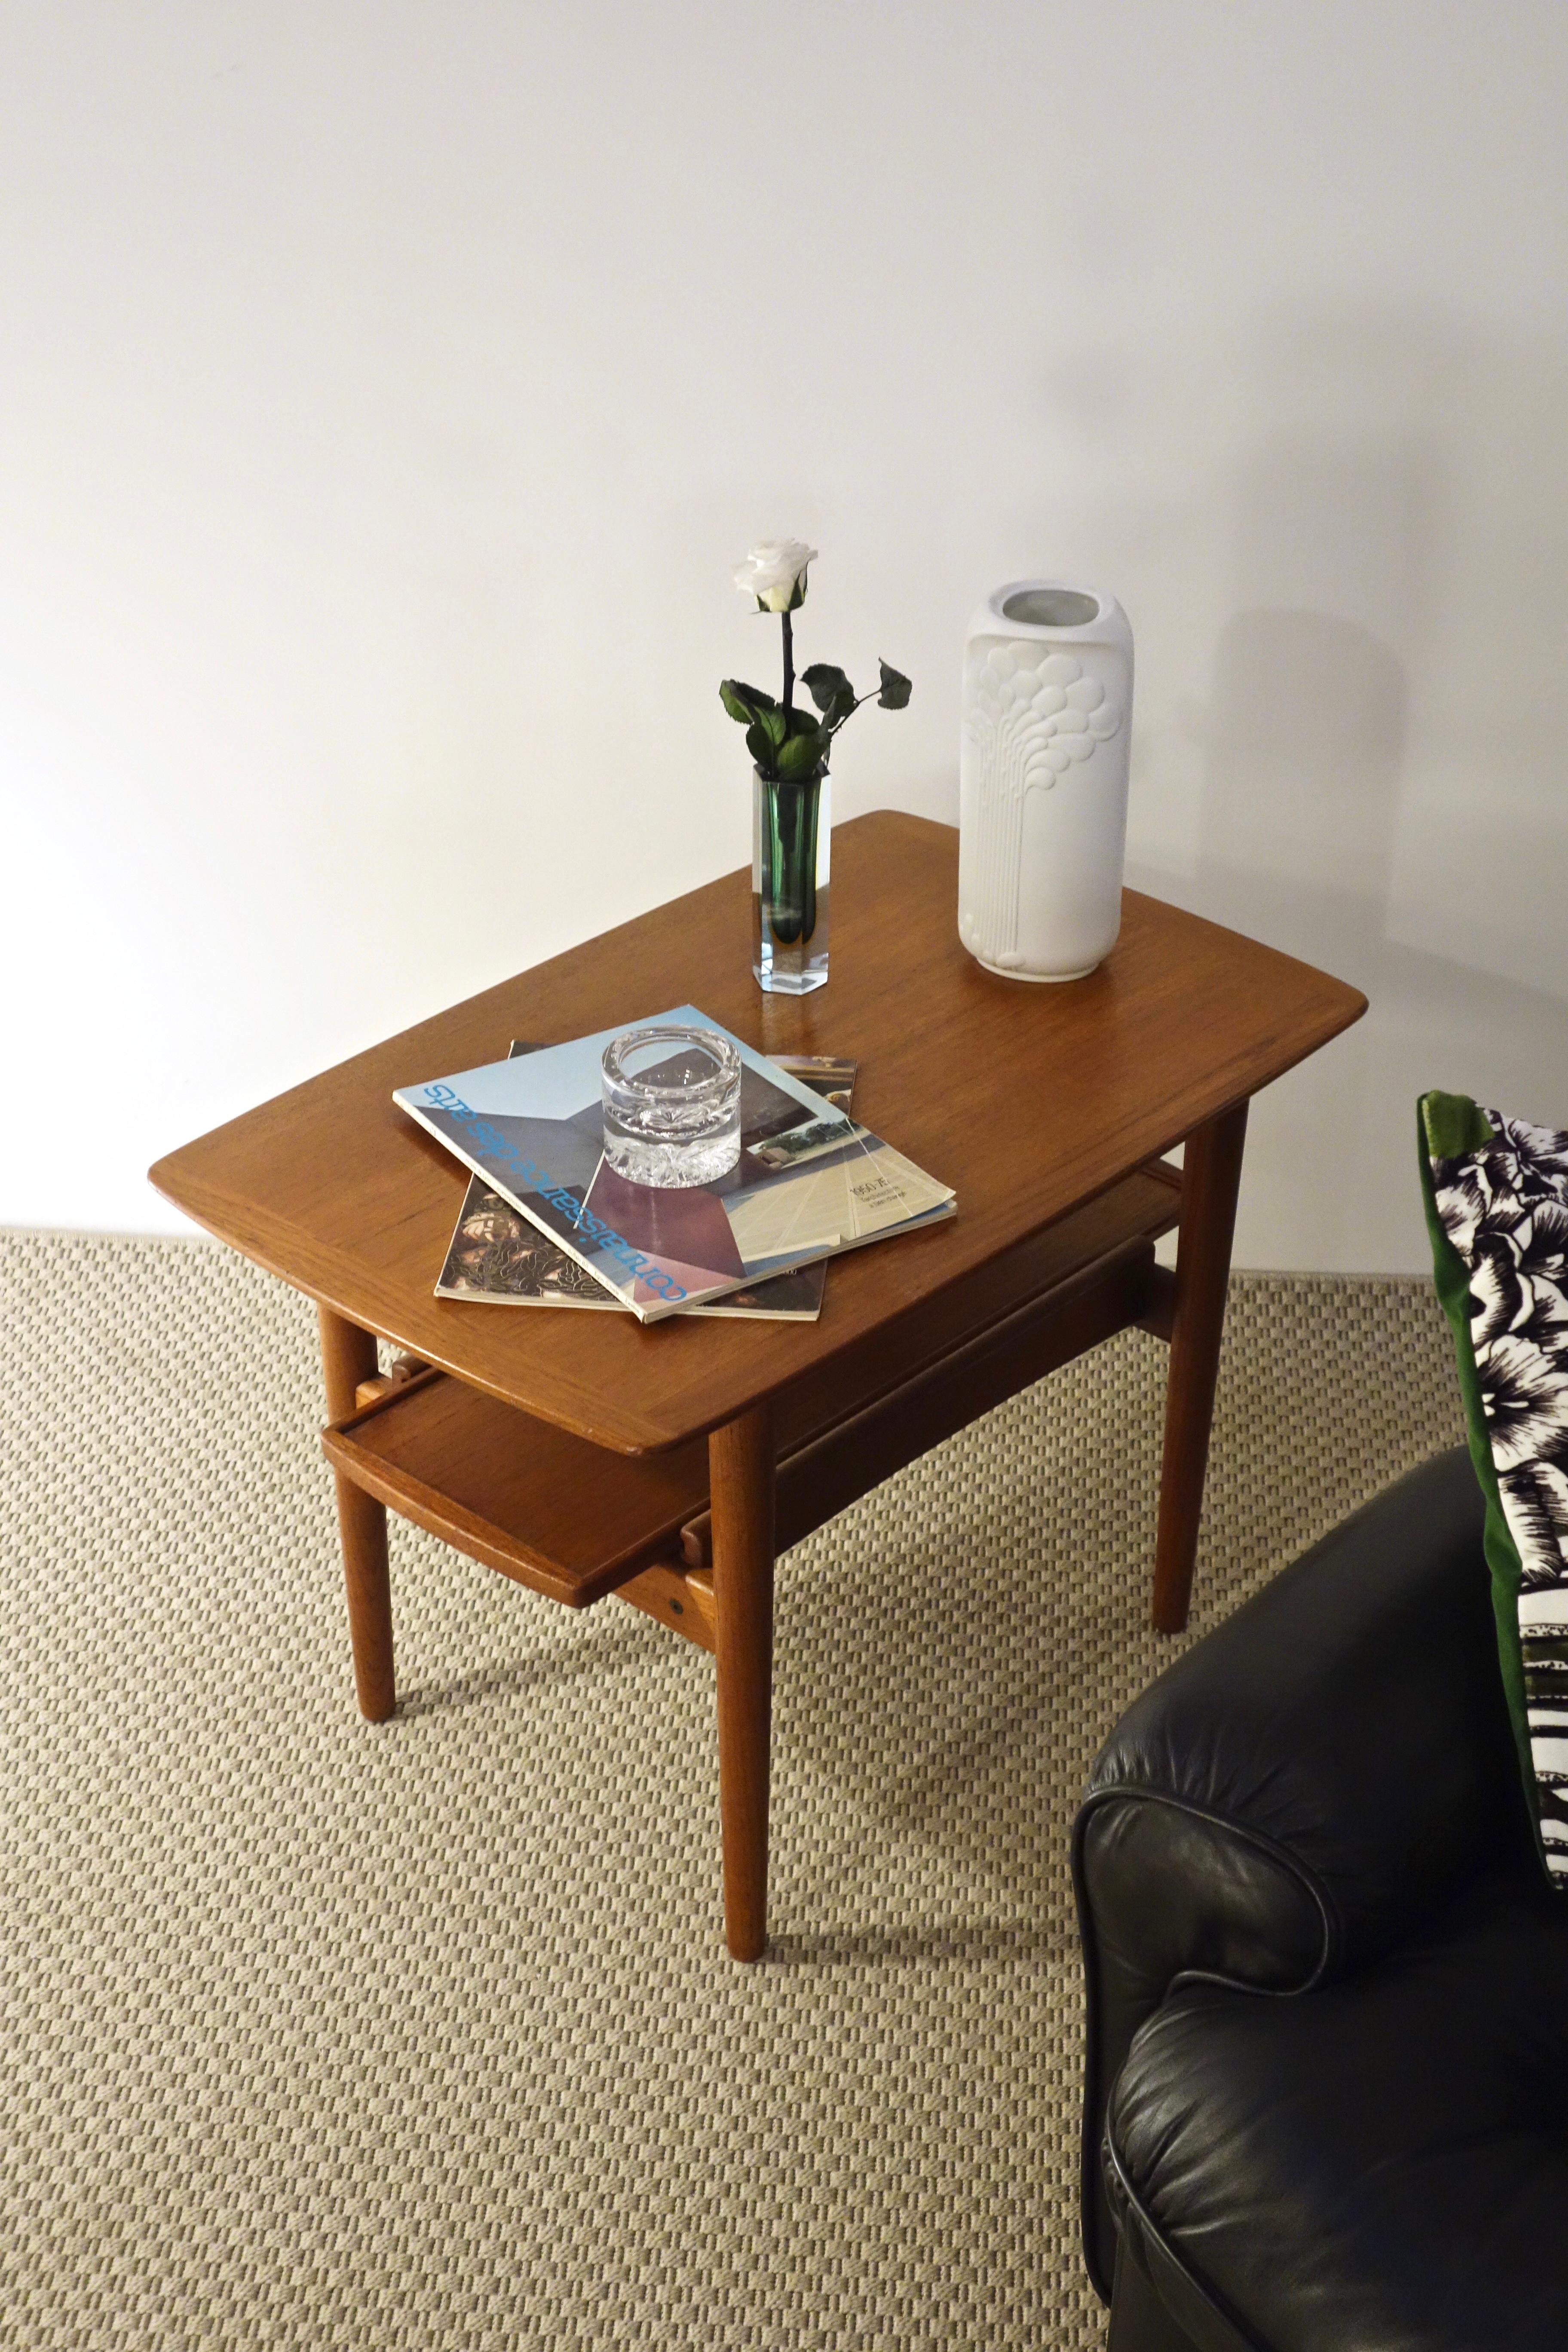 Scandinavian teak end table / coffee table signed Samcom. Danish manufacturing dating from the 1960's. The structure is in solid teak and the top of the 2 veneer tops
Stamped SAMCOM under the tray, this model is rare in this format with its